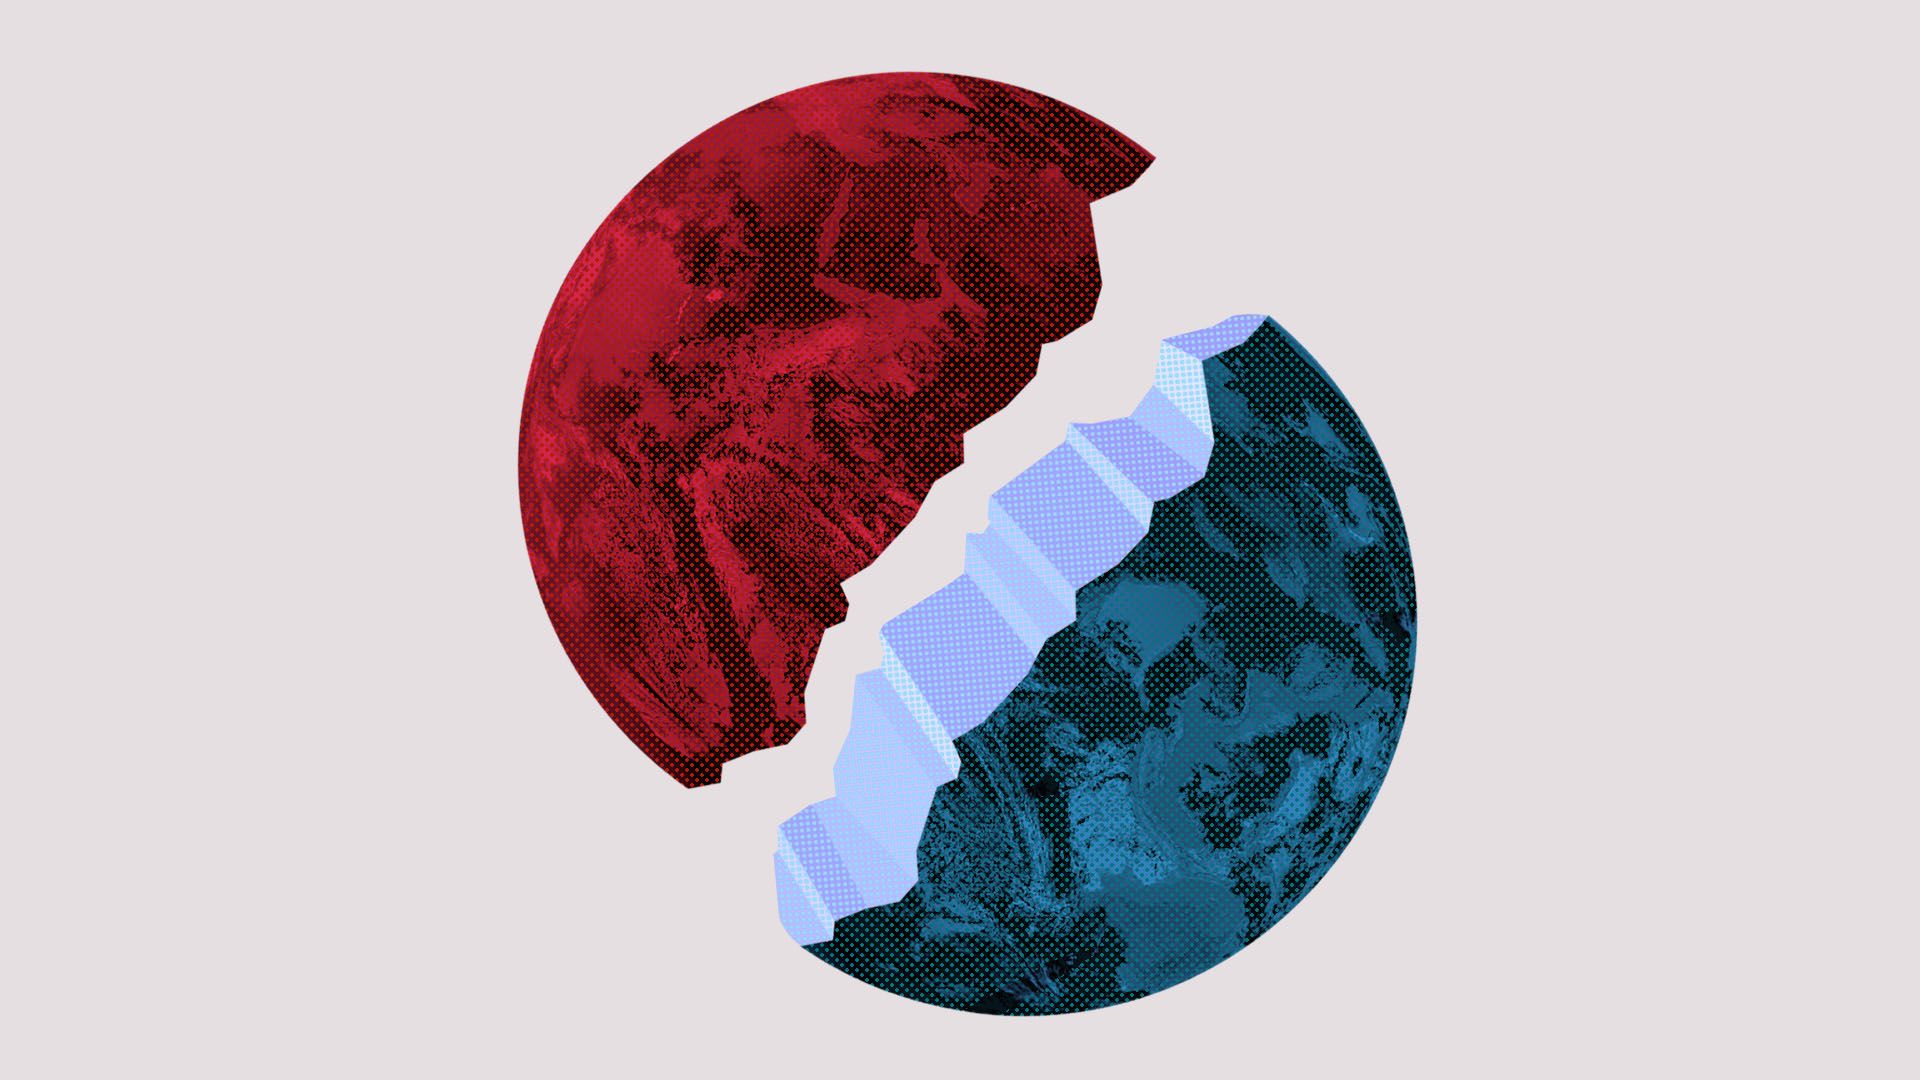 Illustration of a divided planet Earth, split into red and blue halves